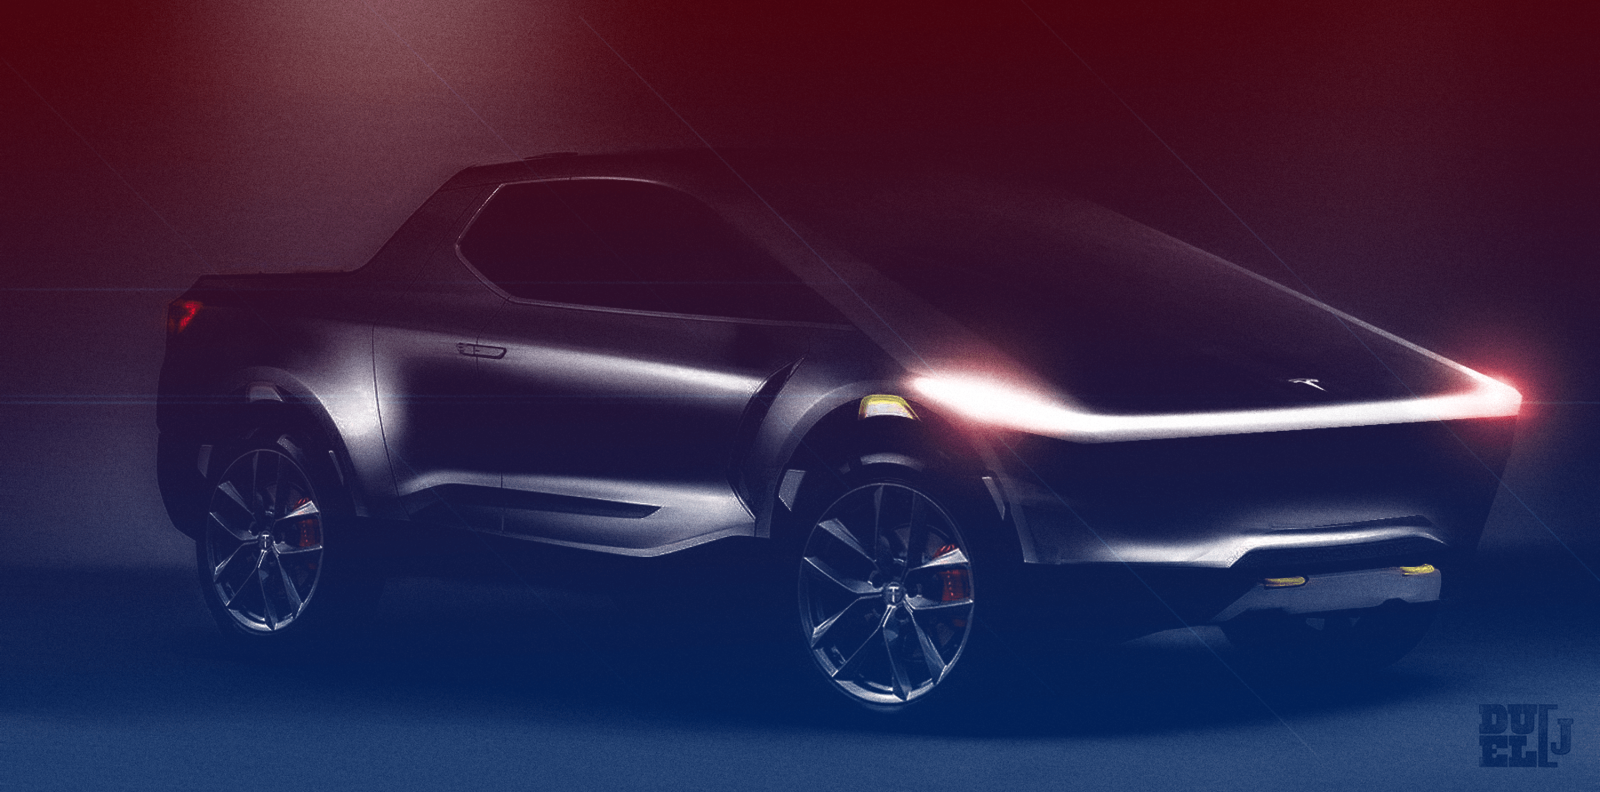 Illustration for article titled Behold... the WORST concept image of the upcoming Tesla pickup